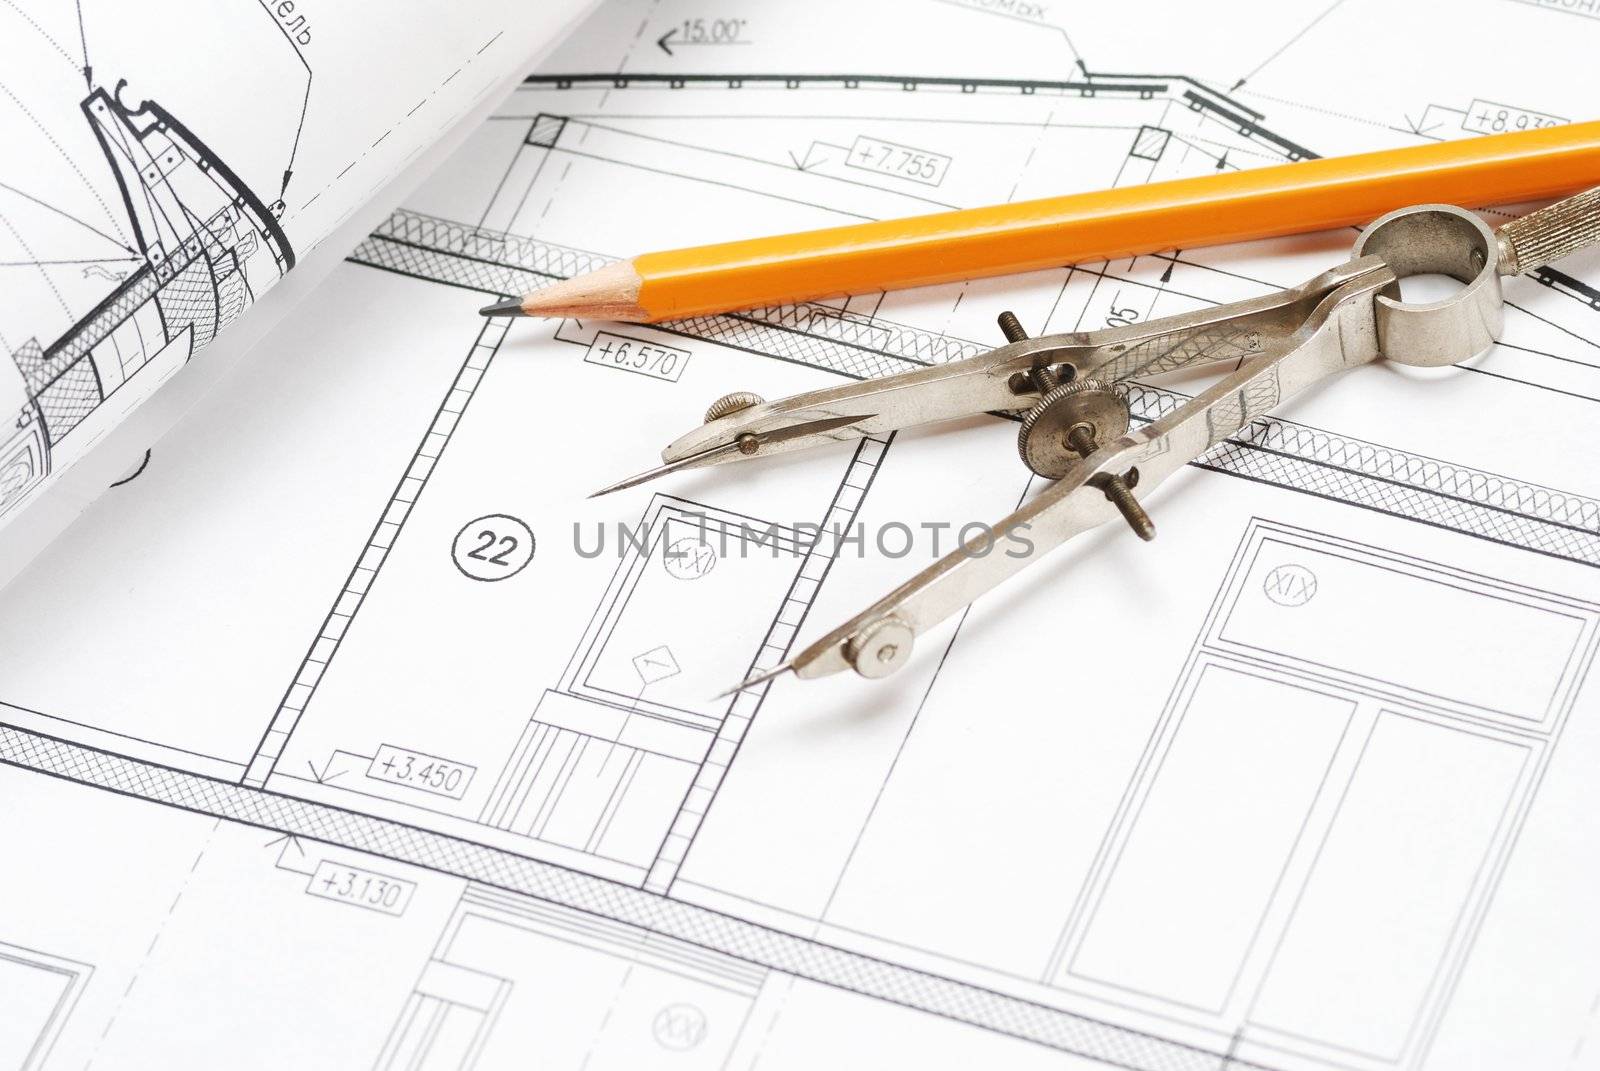 Tools over house plan blueprints